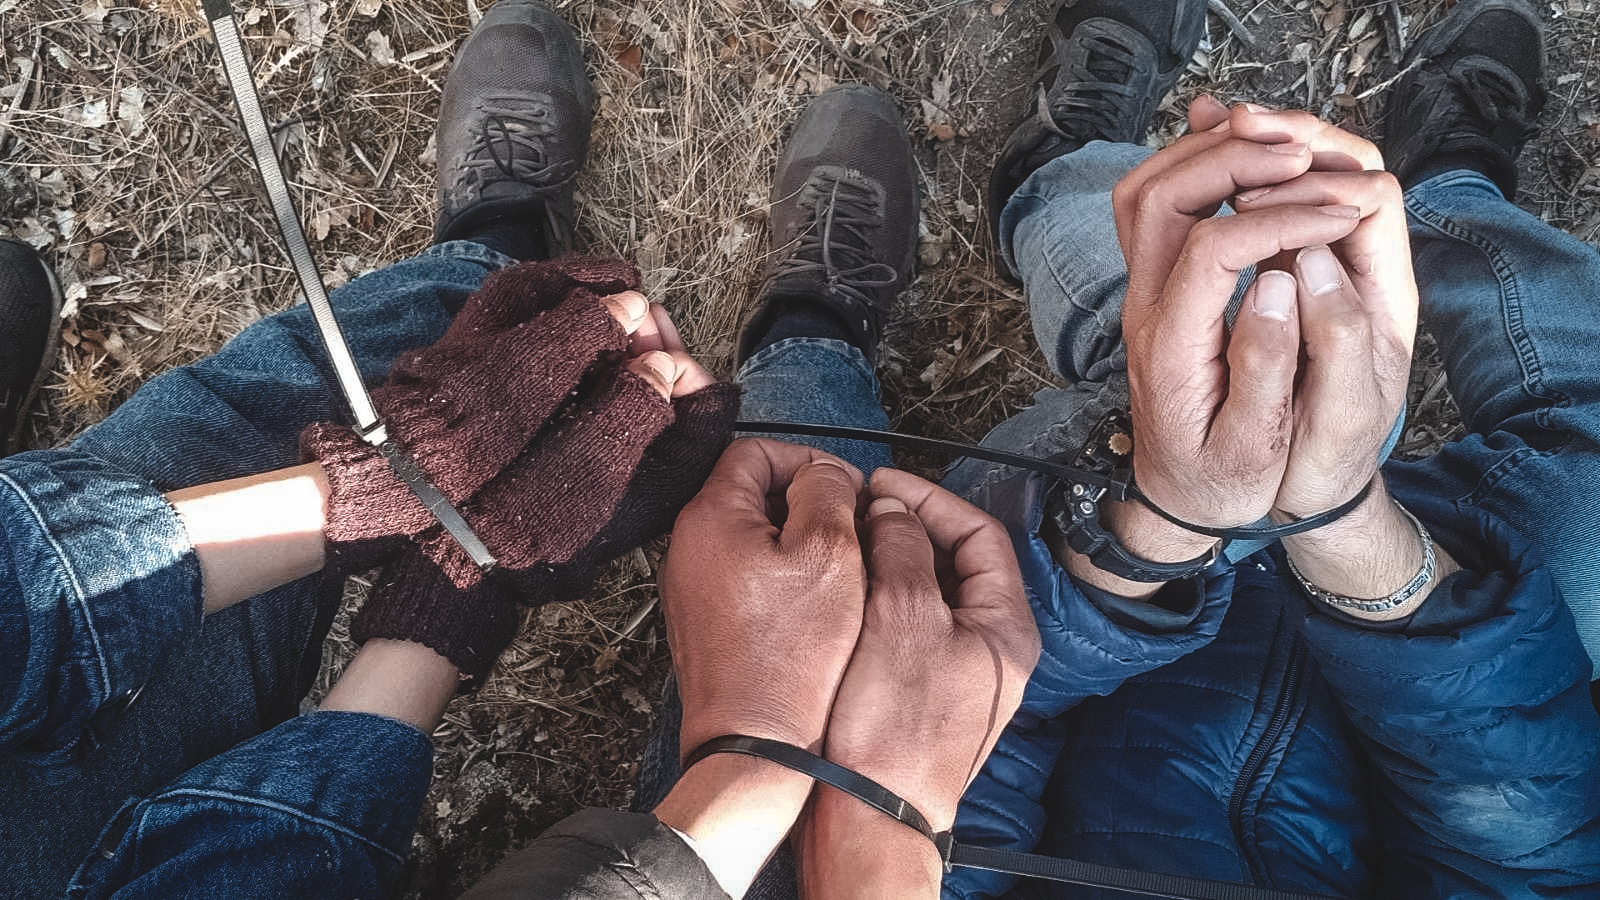 Three people found handcuffed, four injured on the Aegean island of Lesvos